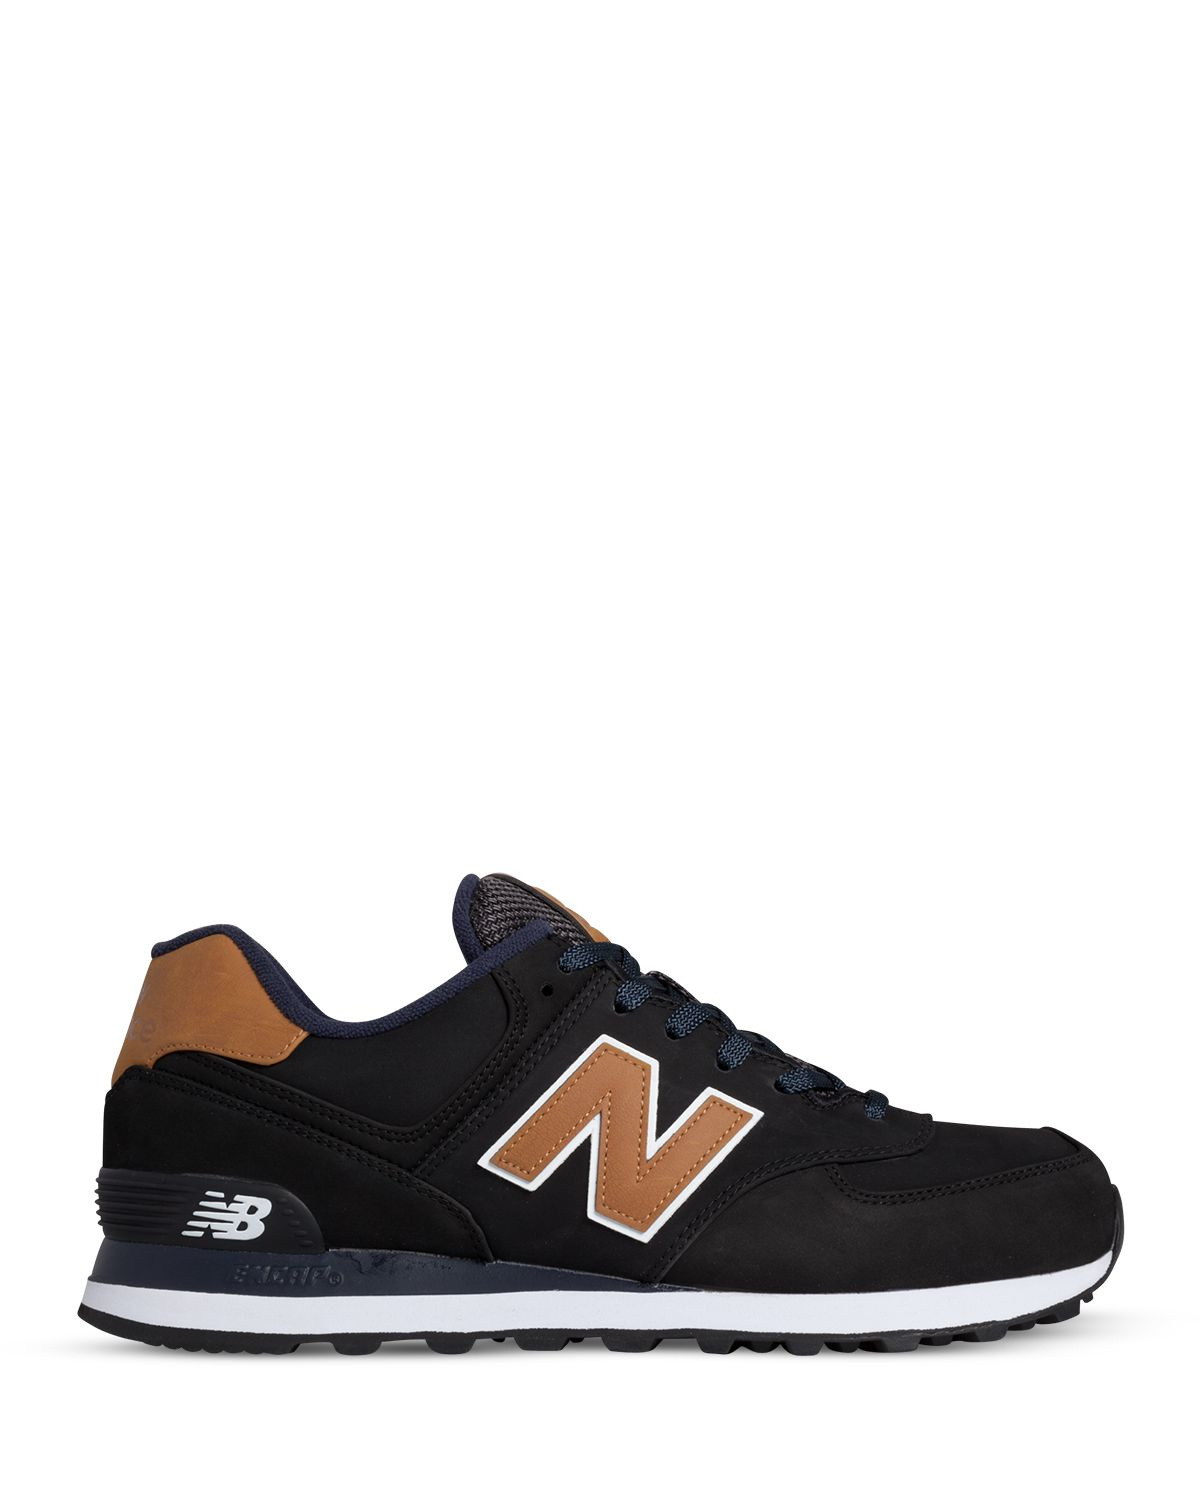 Lyst - New Balance Lux Collection 574 Sneakers in Black